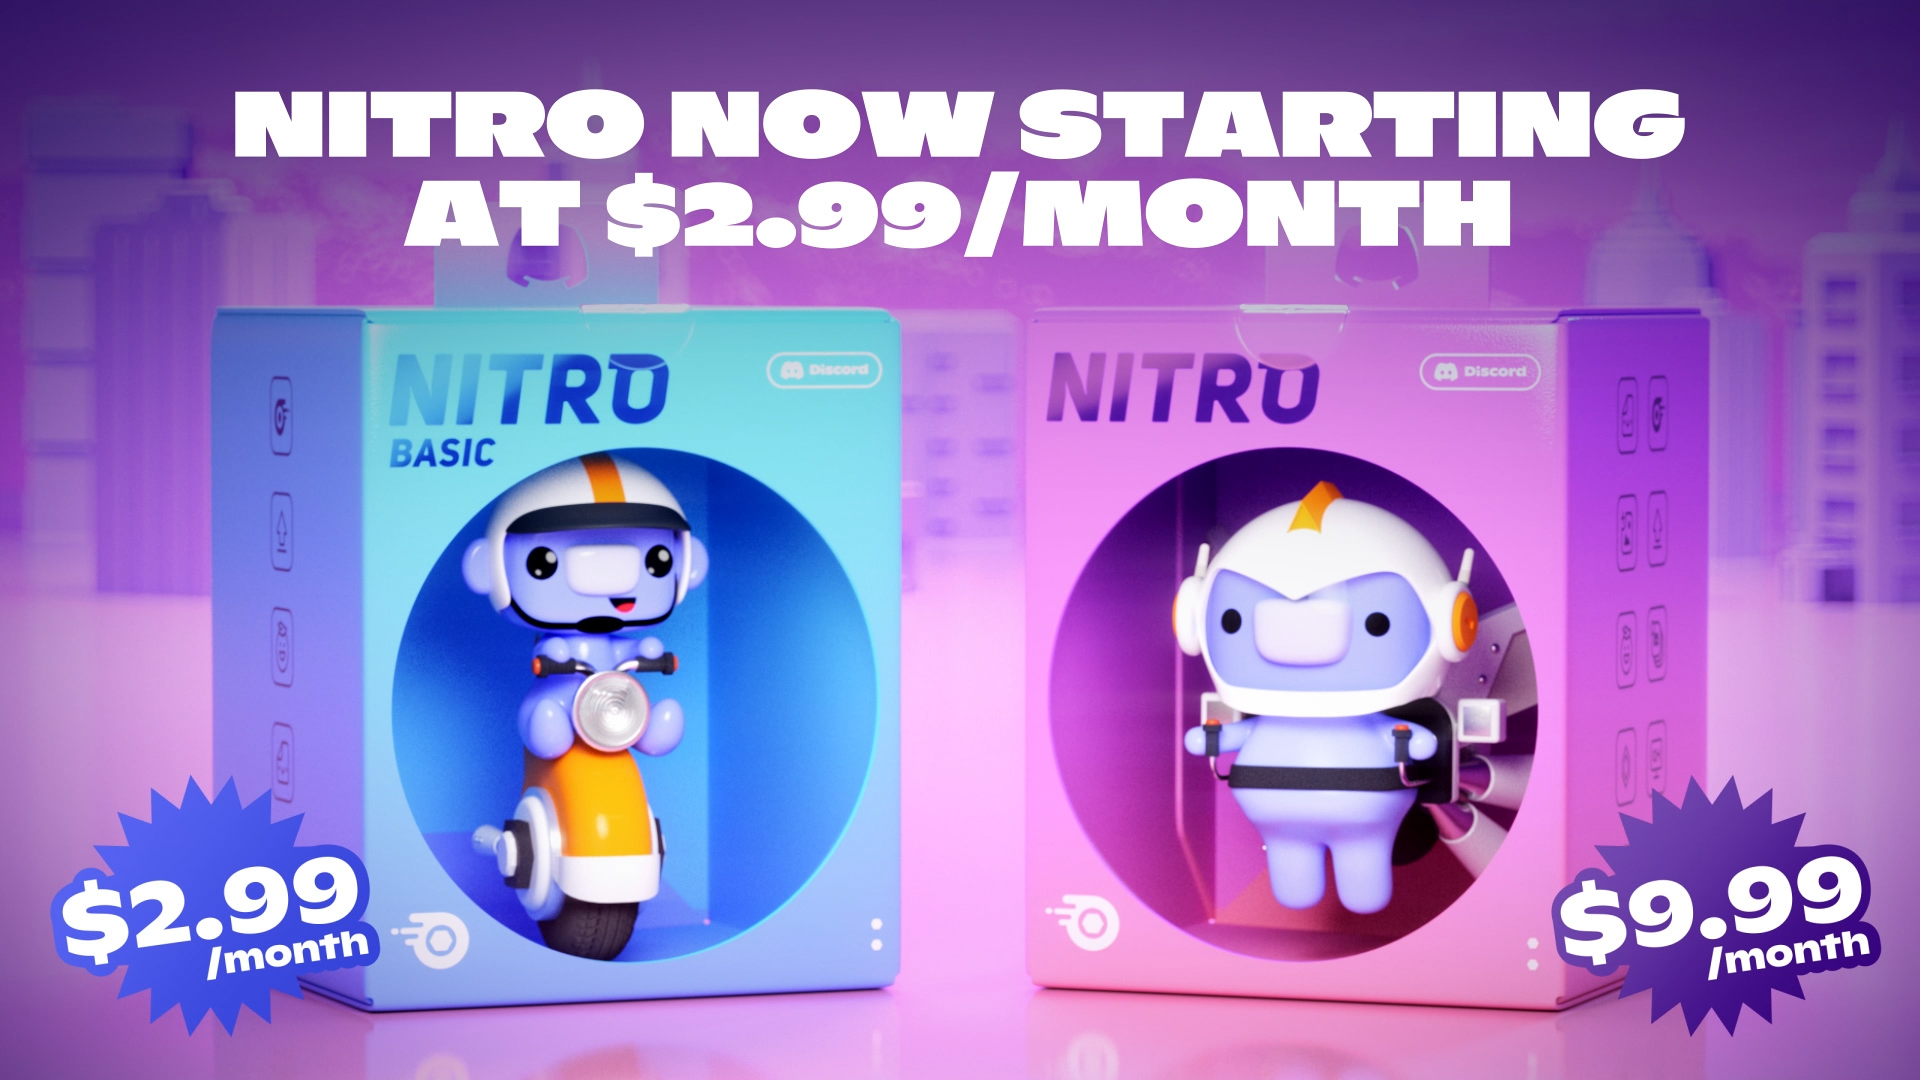 Basic plans Discord Nitro and Discord shown side by side with prices, represented by two Funko-Pop-style boxed figures of the Discord mascot.